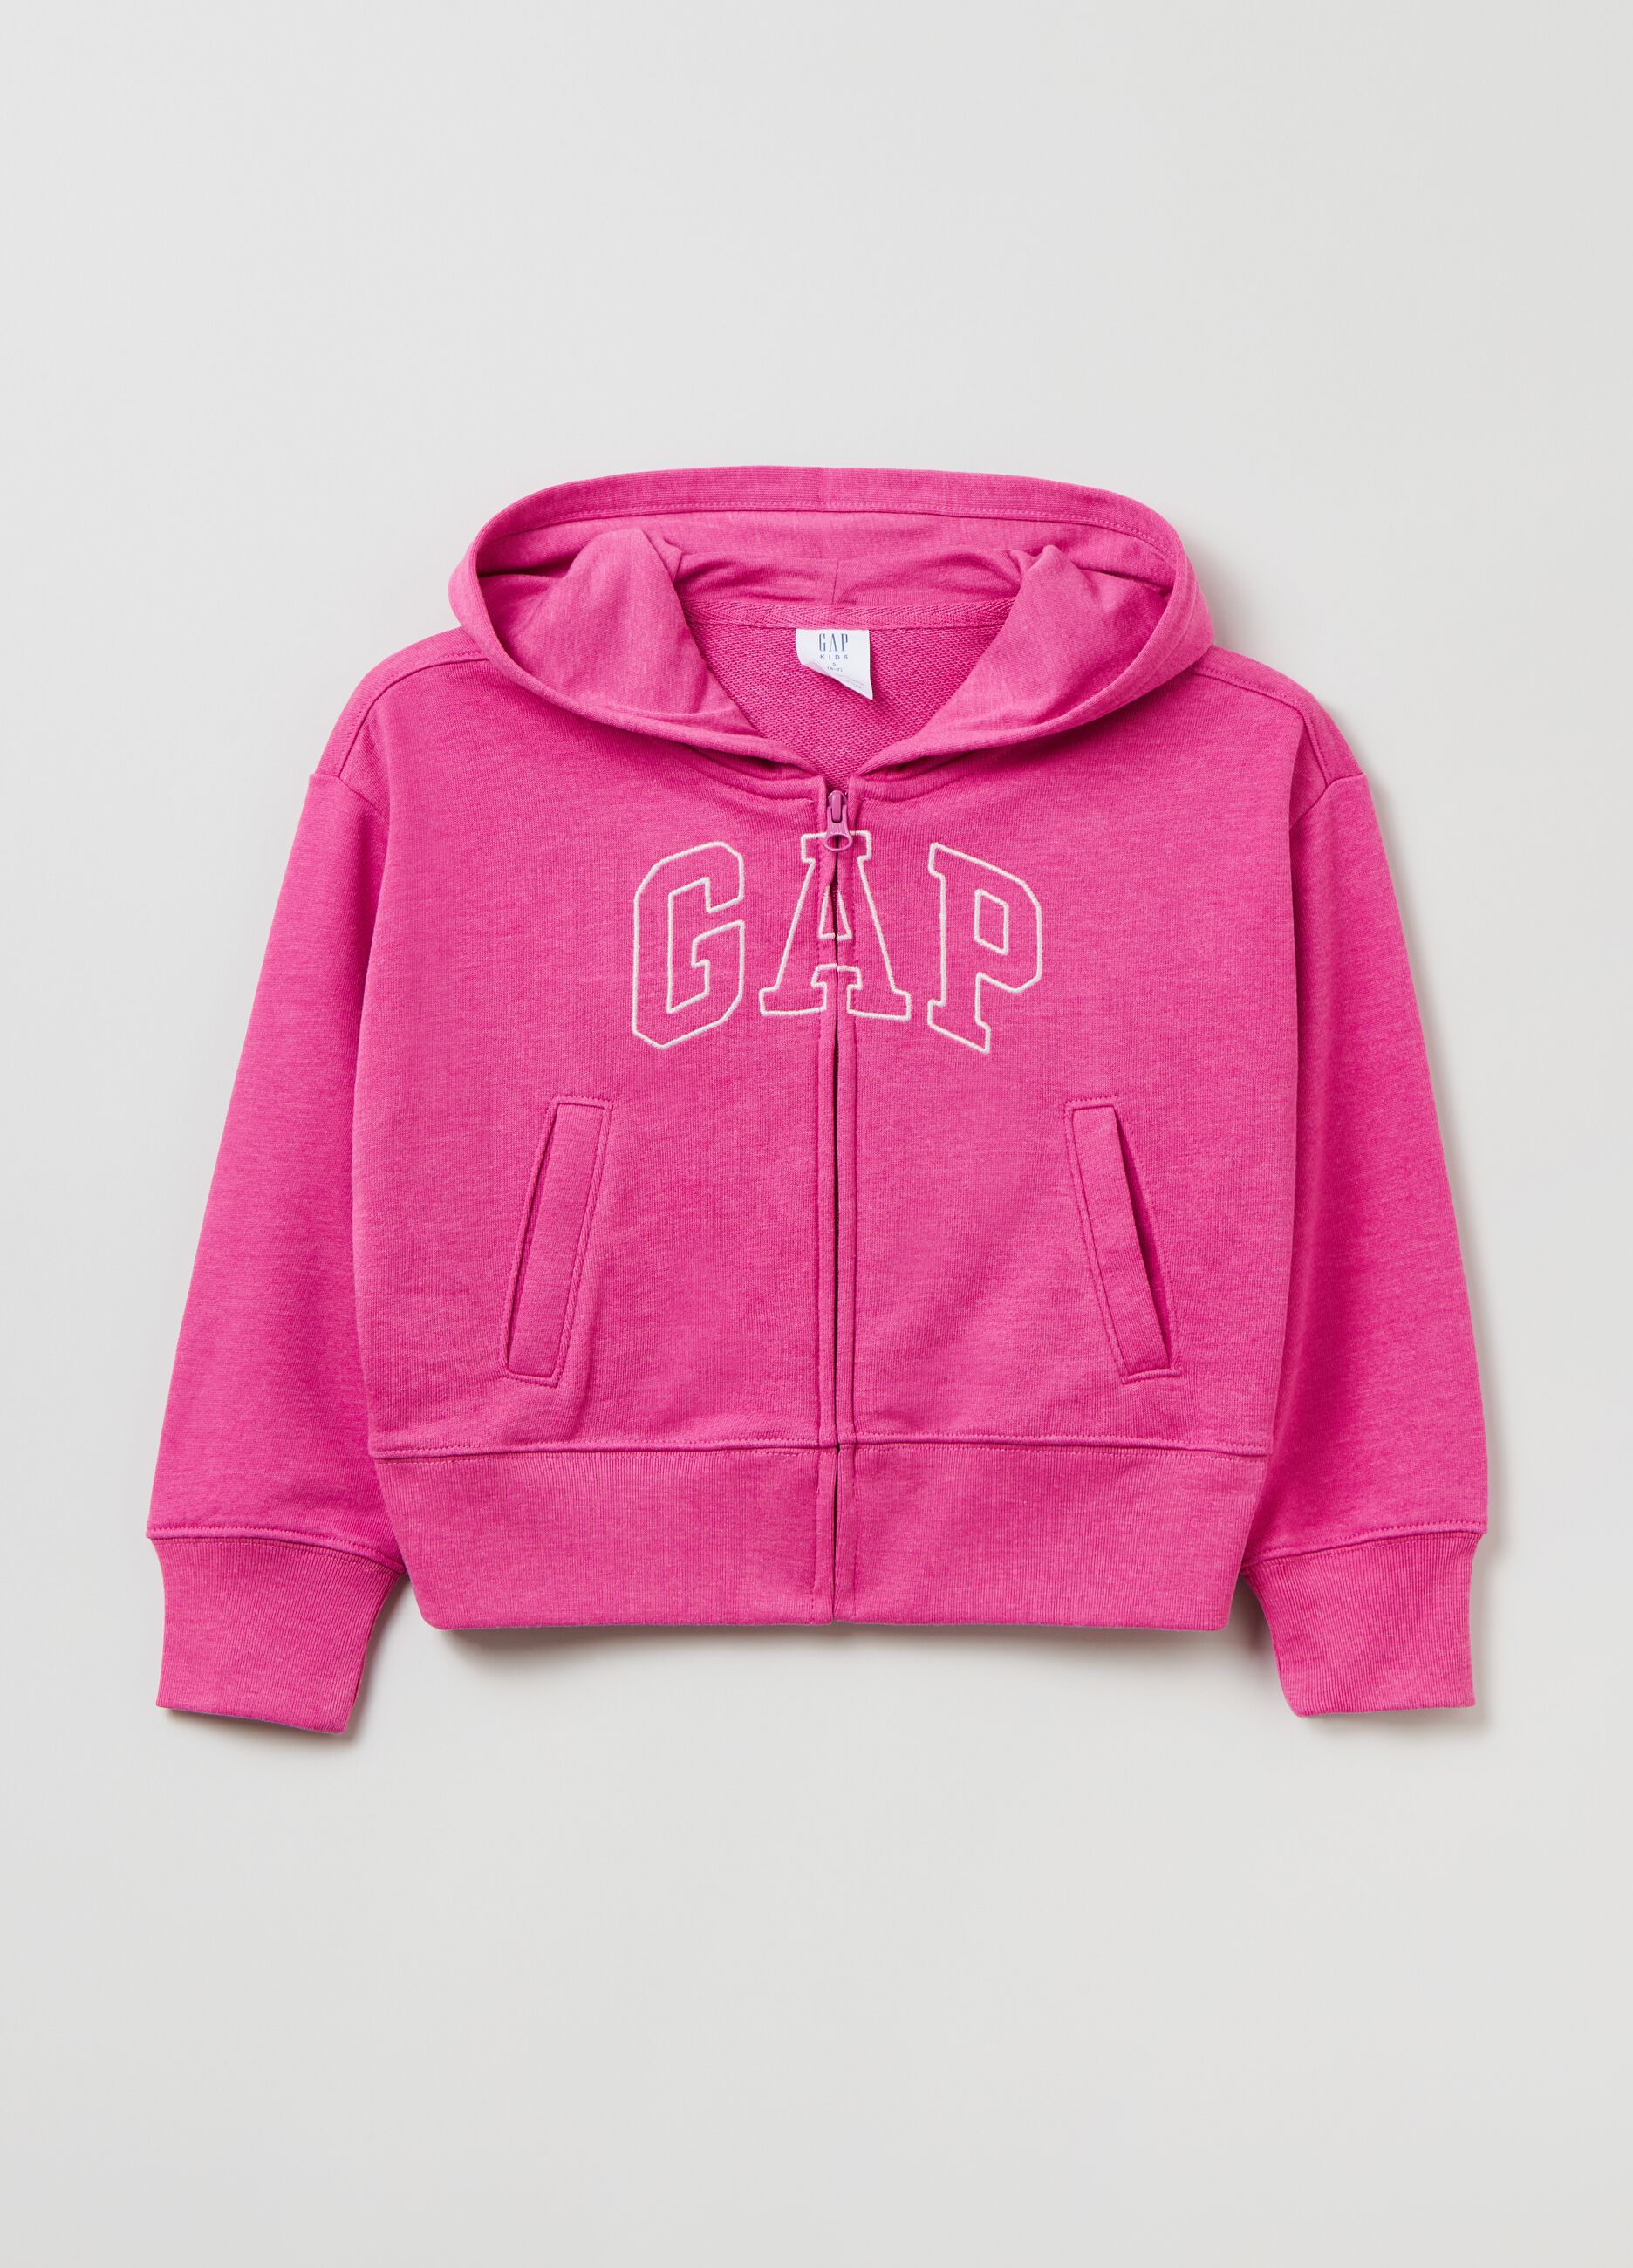 Full-zip hoodie with embroidered logo